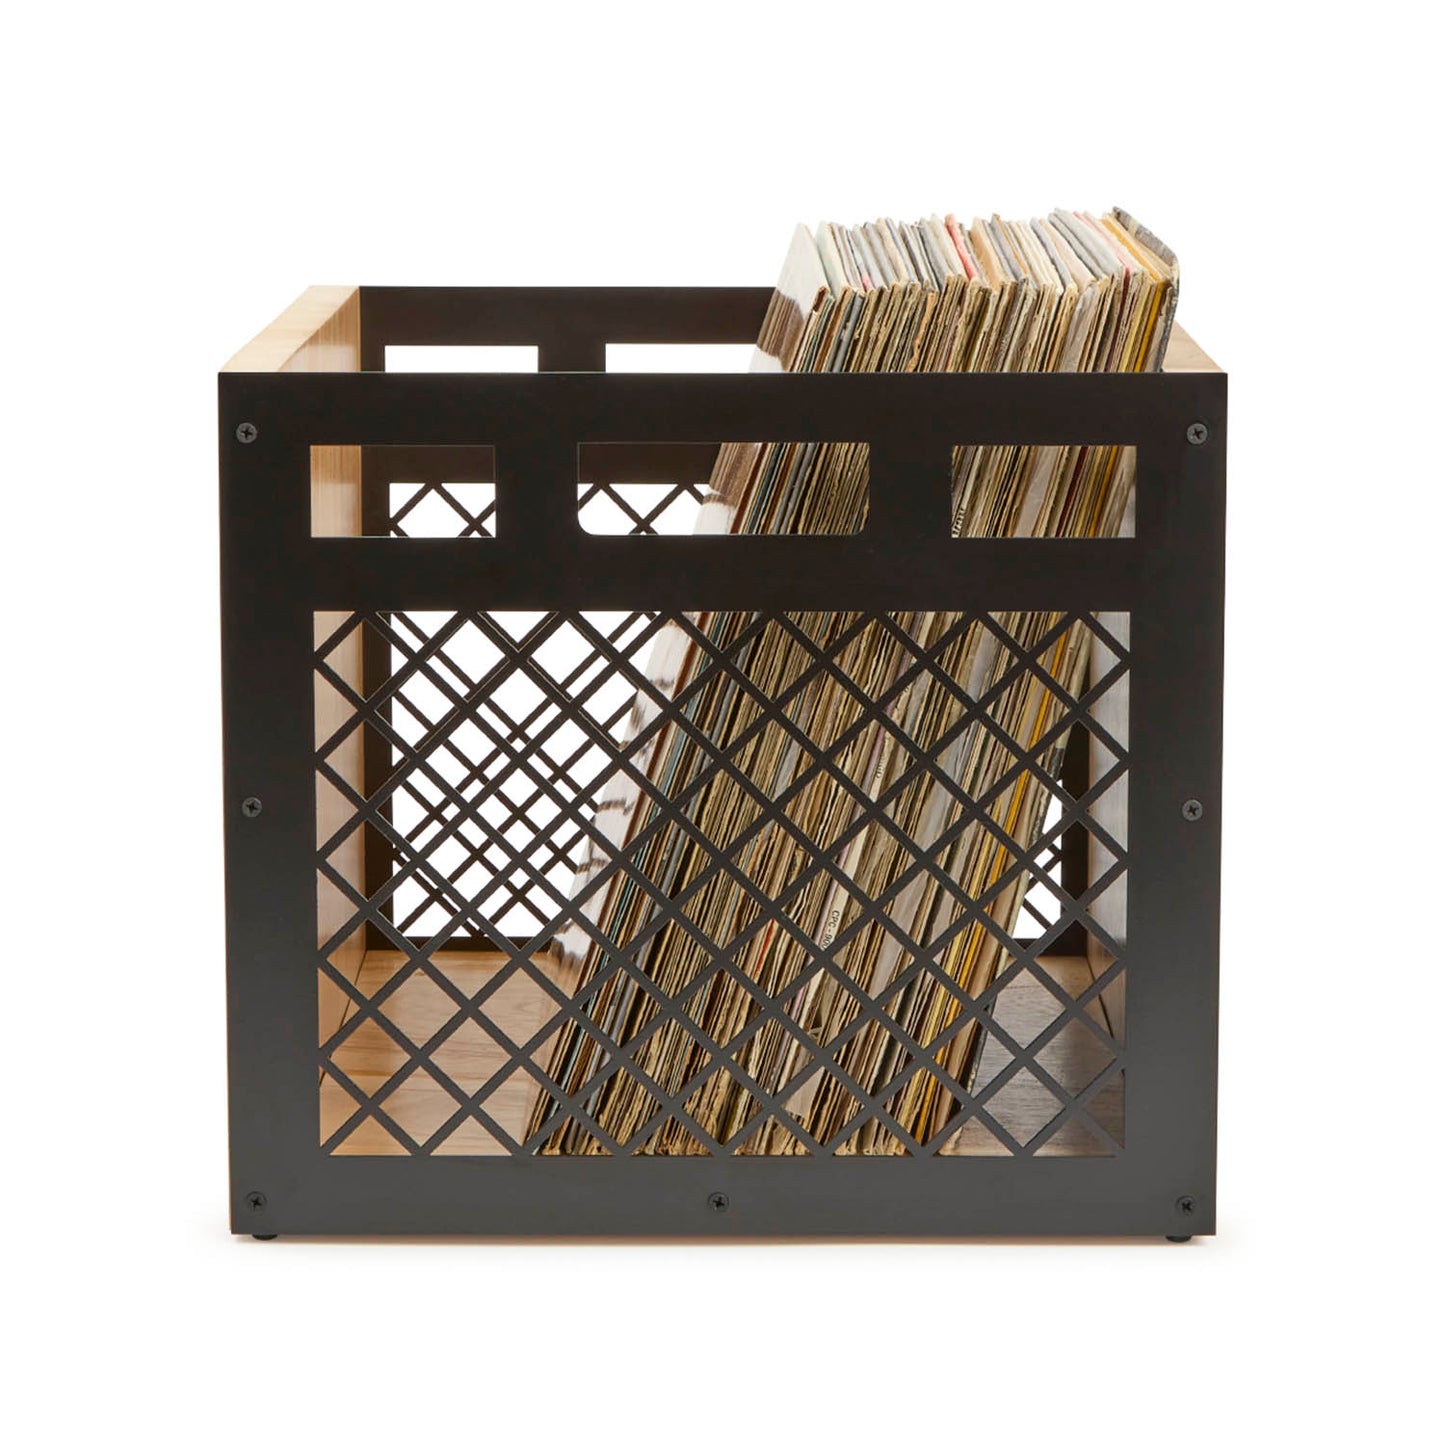 Vinyl Record Box Holds up to 50 Albums, Record Box Solid Wood